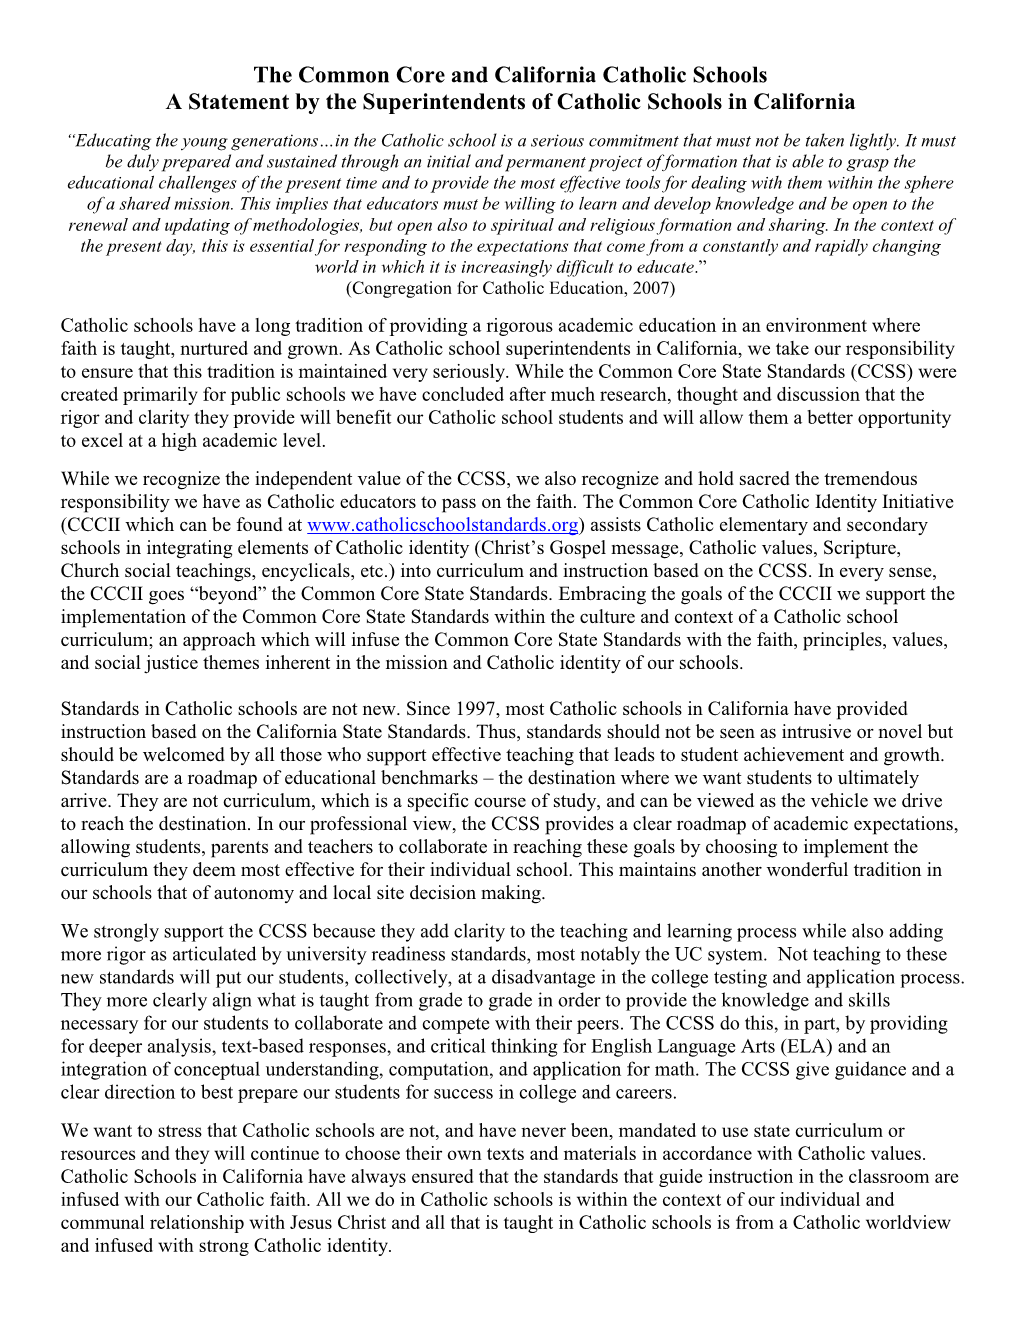 The Common Core and California Catholic Schools a Statement by the Superintendents of Catholic Schools in California